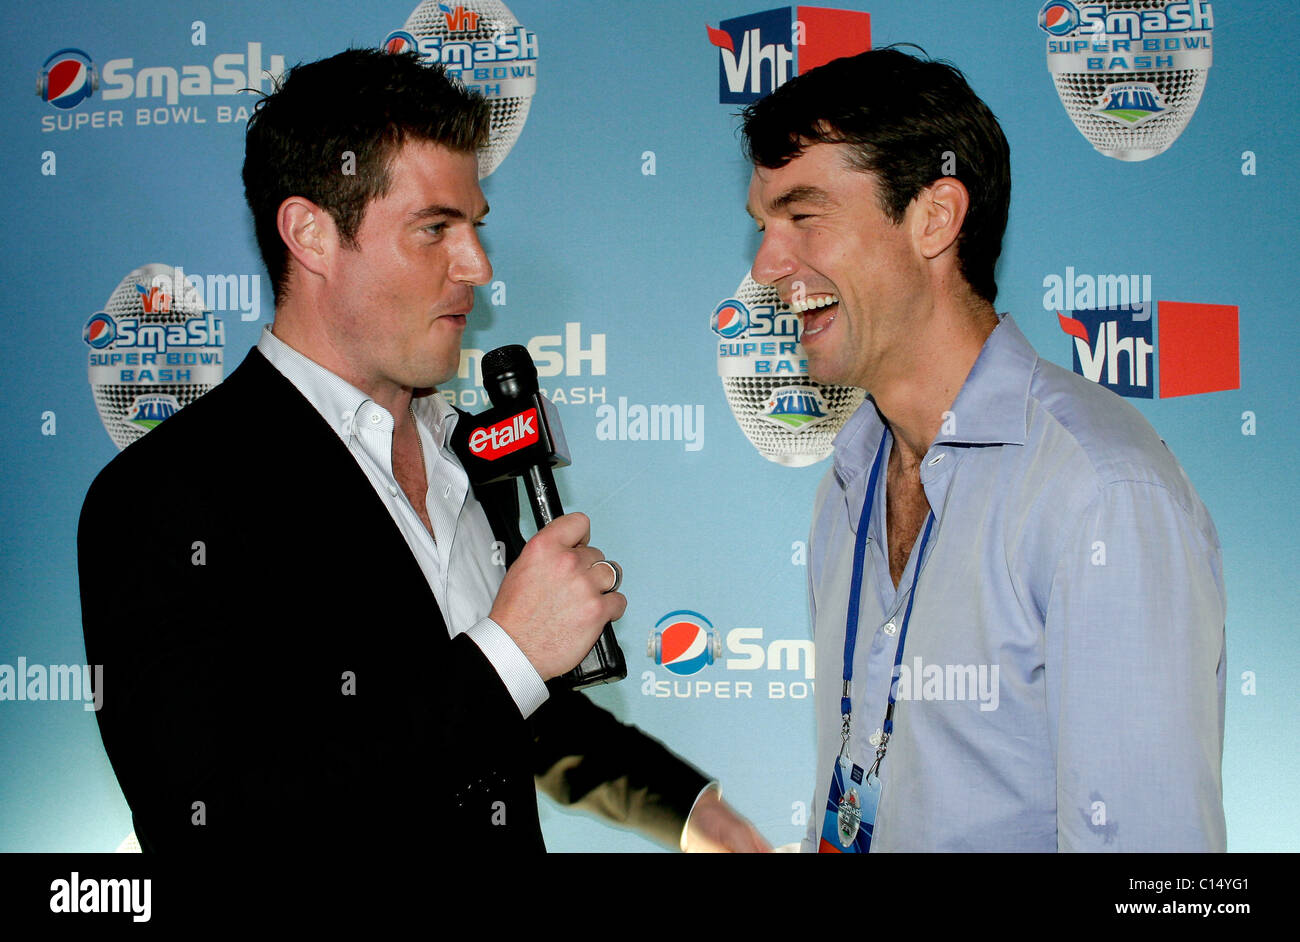 Jesse Palmer interviews Jerry O'Connell Jerry is hosting the Super Bowl XLIII Pepsi Smash at the Ford Amphitheatre Tampa, Stock Photo